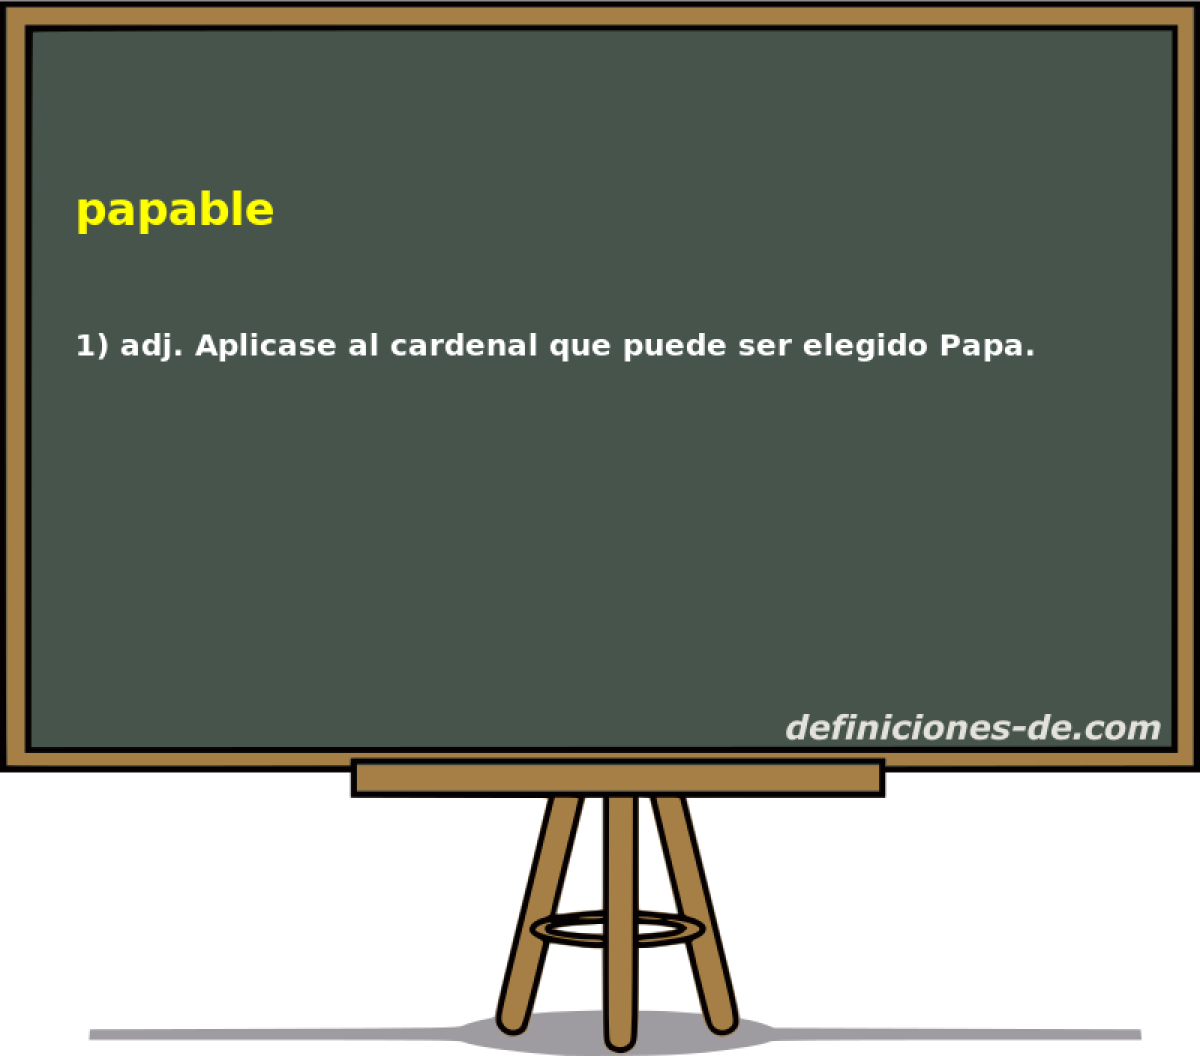 papable 